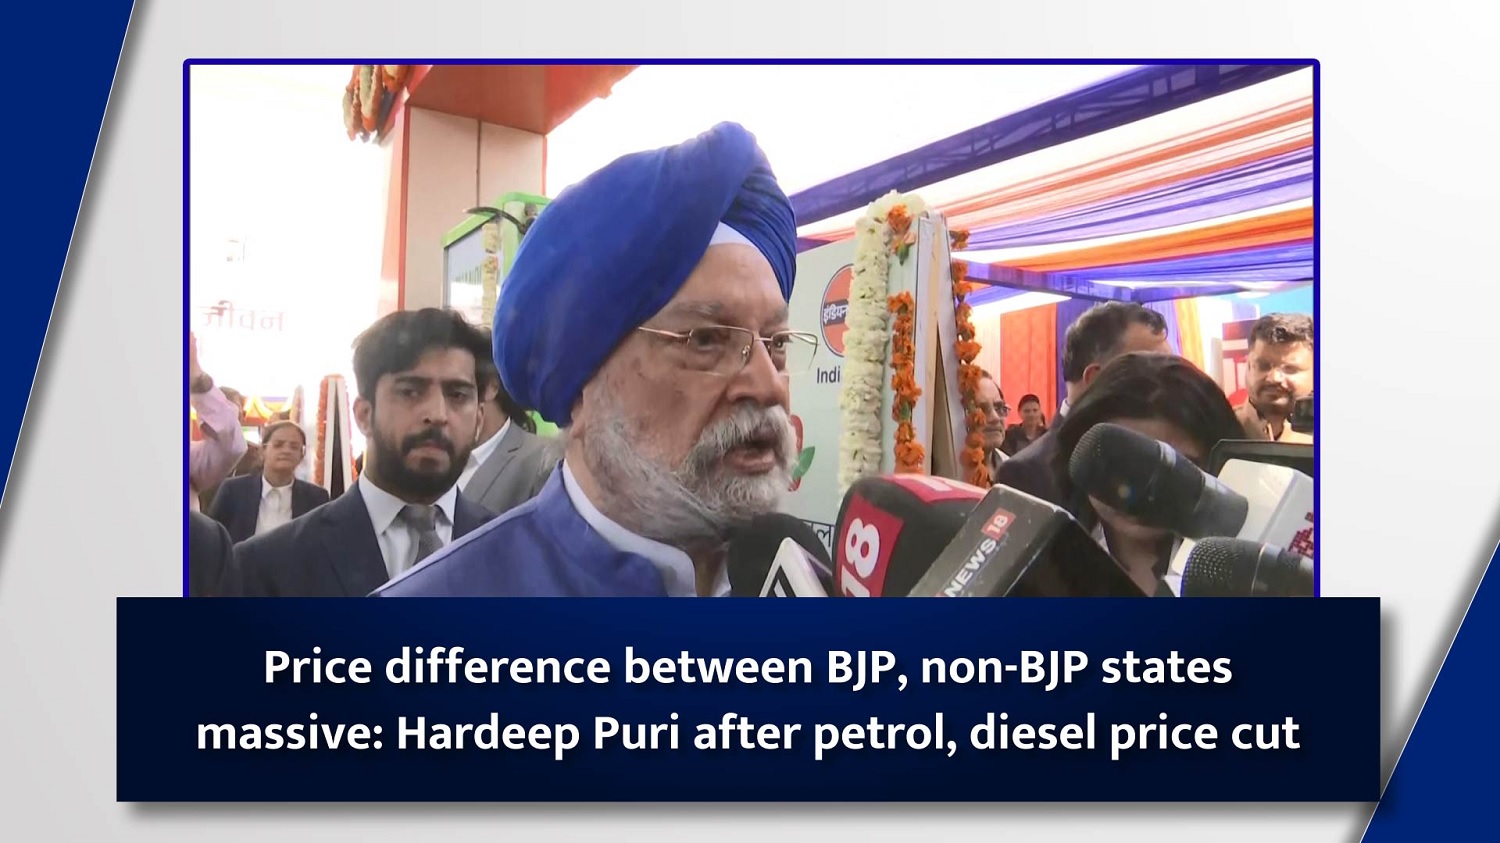 Price difference between BJP, non-BJP states massive Hardeep Puri after petrol, diesel price cut